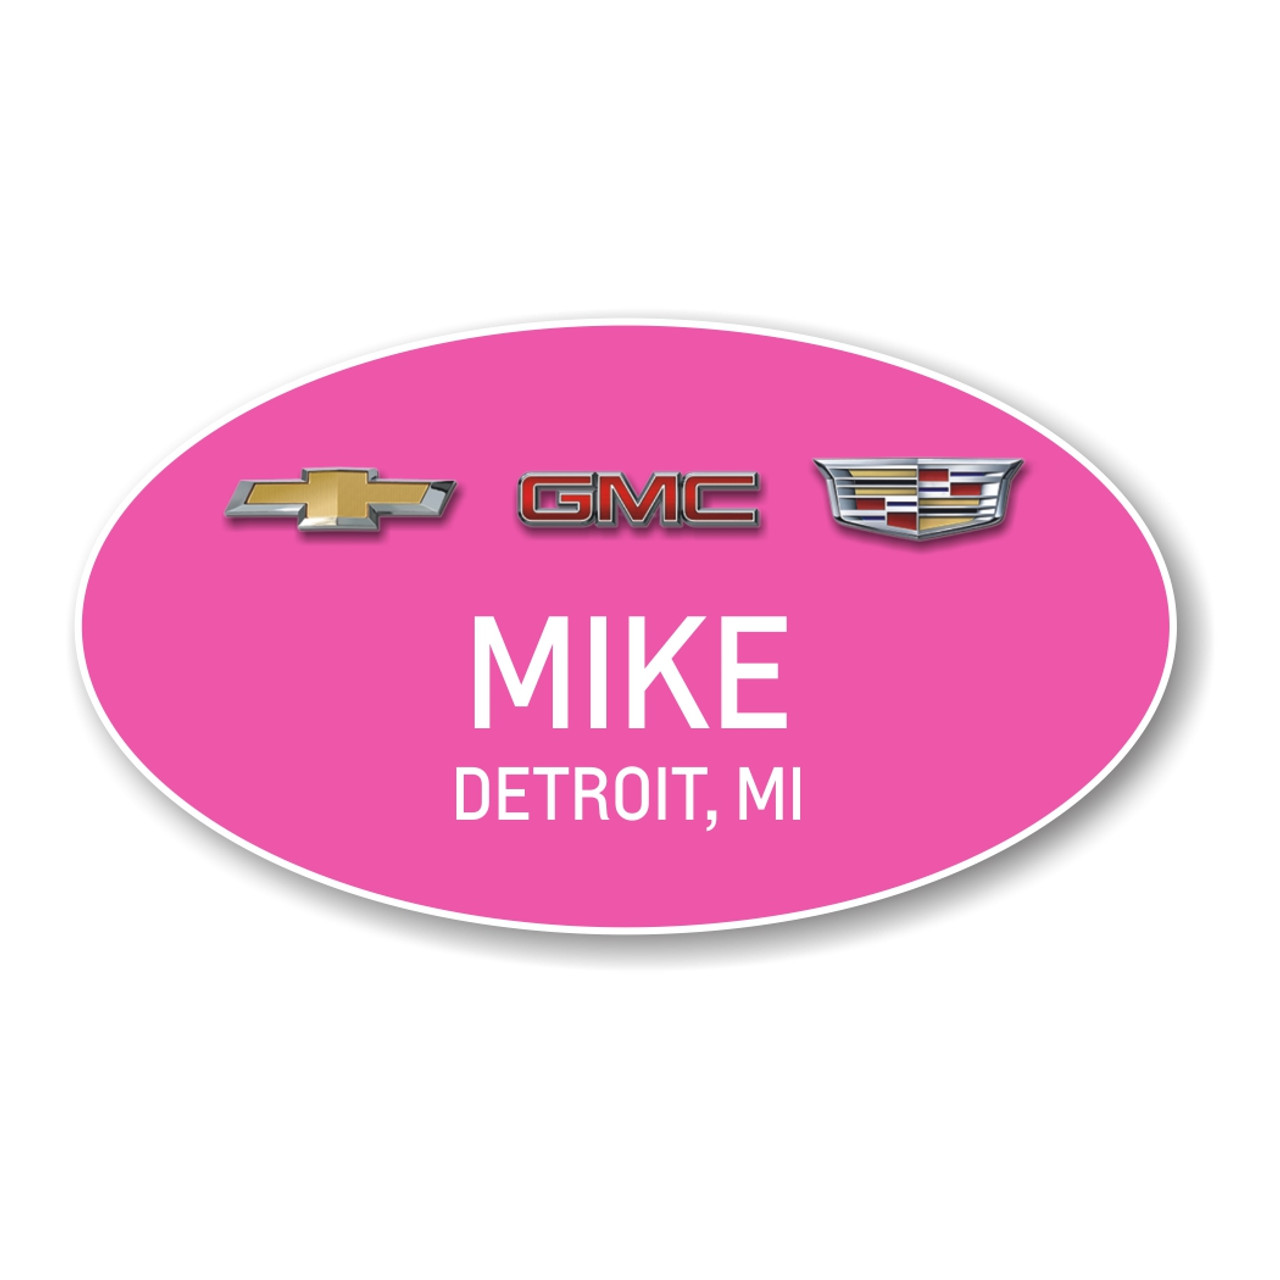 Chevrolet GMC Cadillac Pink Oval Name Badge